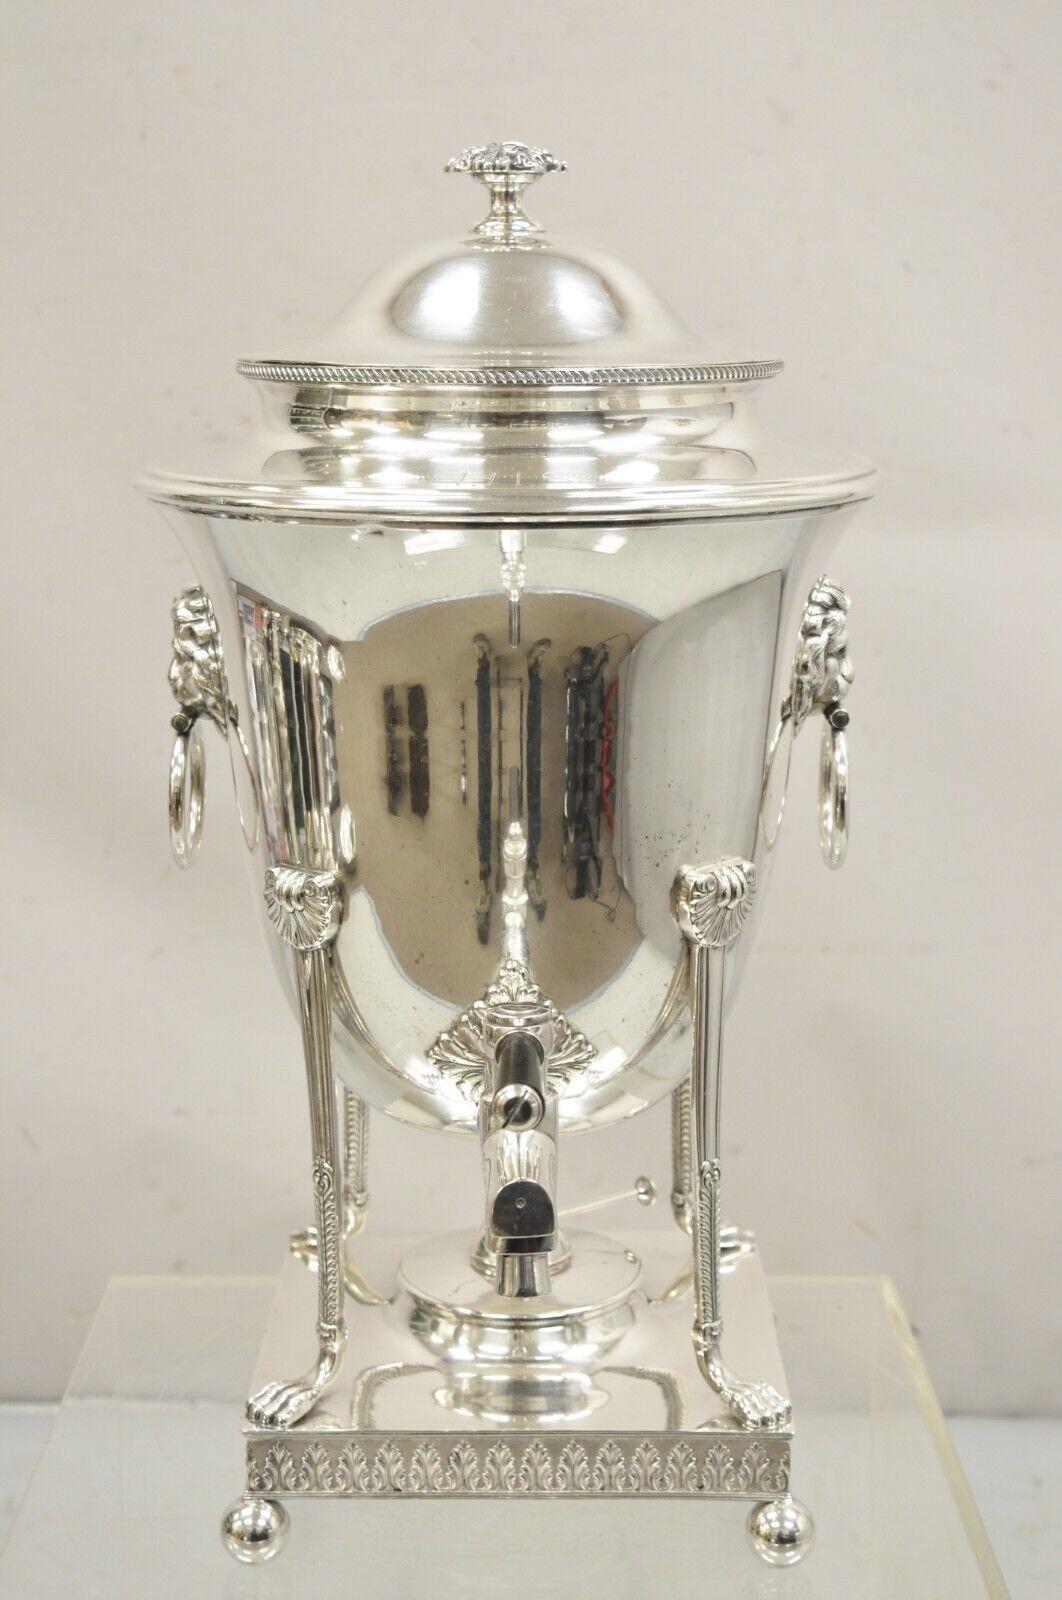 19th C. English Silver Plated Regency Paw Foot Samovar with Lions by Folgate In Good Condition For Sale In Philadelphia, PA